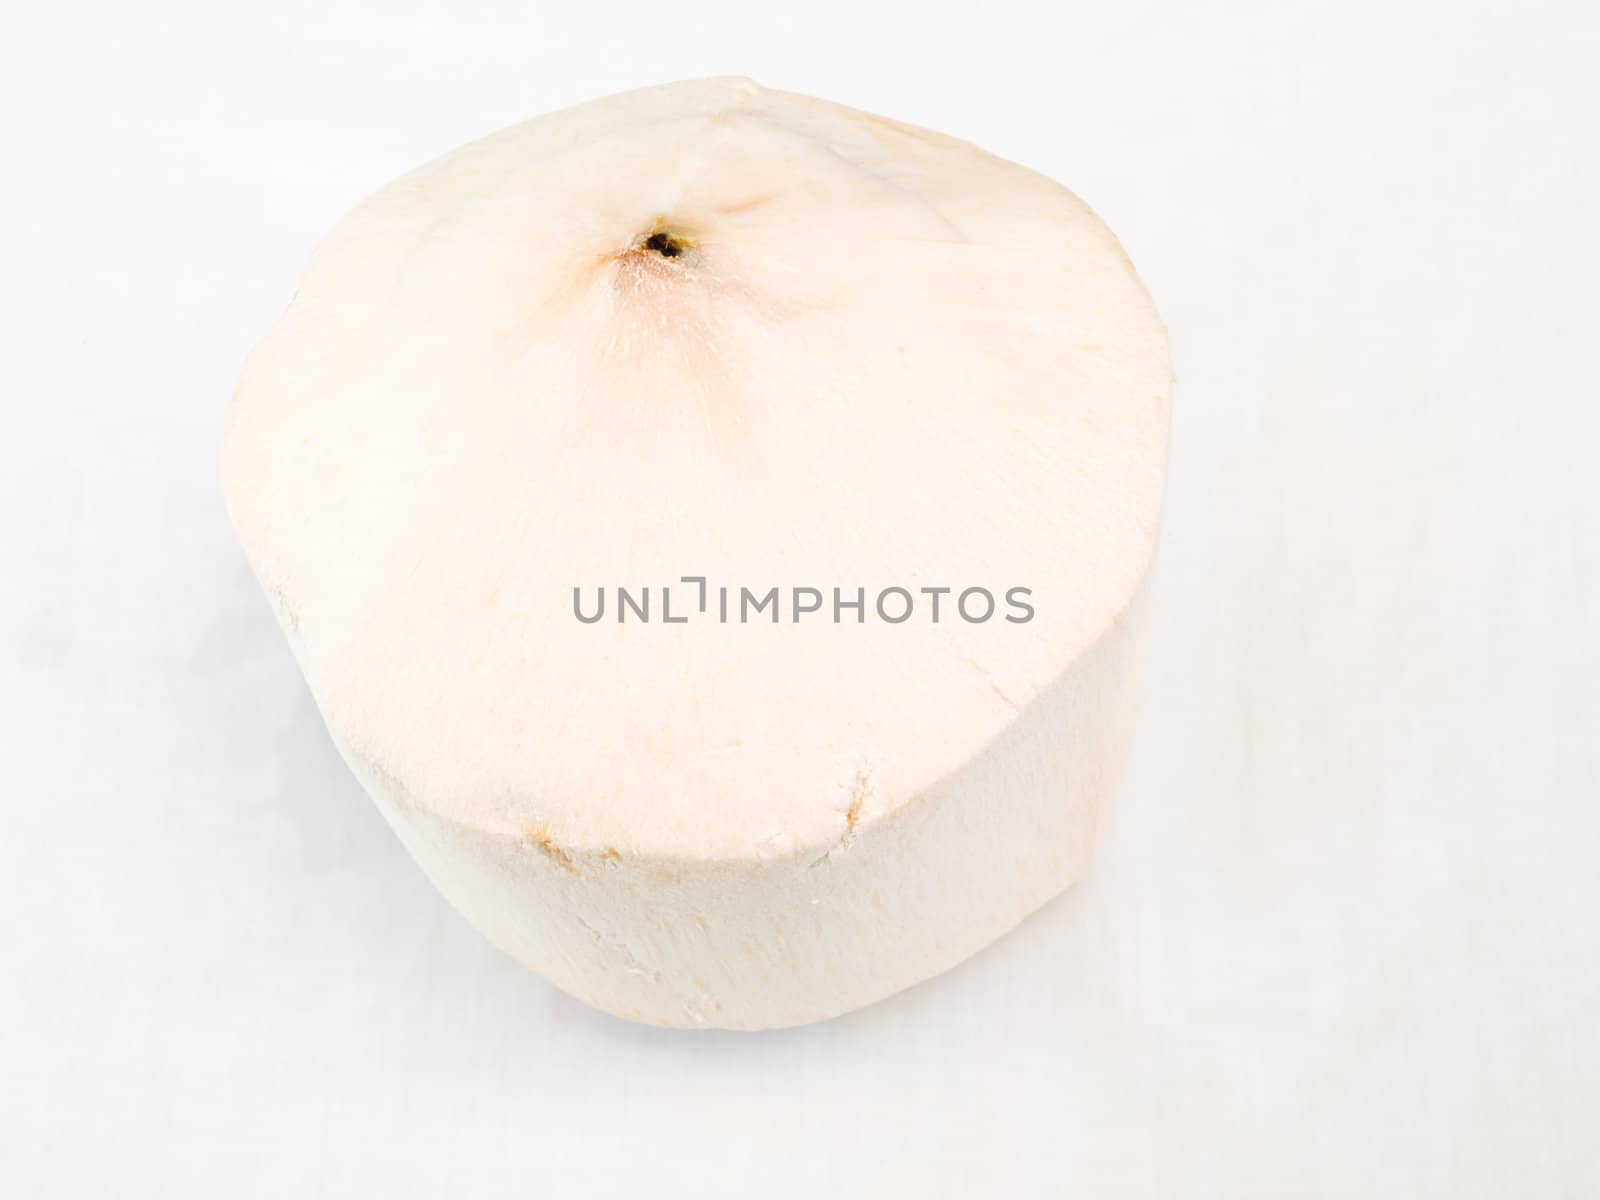 A fresh coconut from Thailand isolated on white background by gururugu